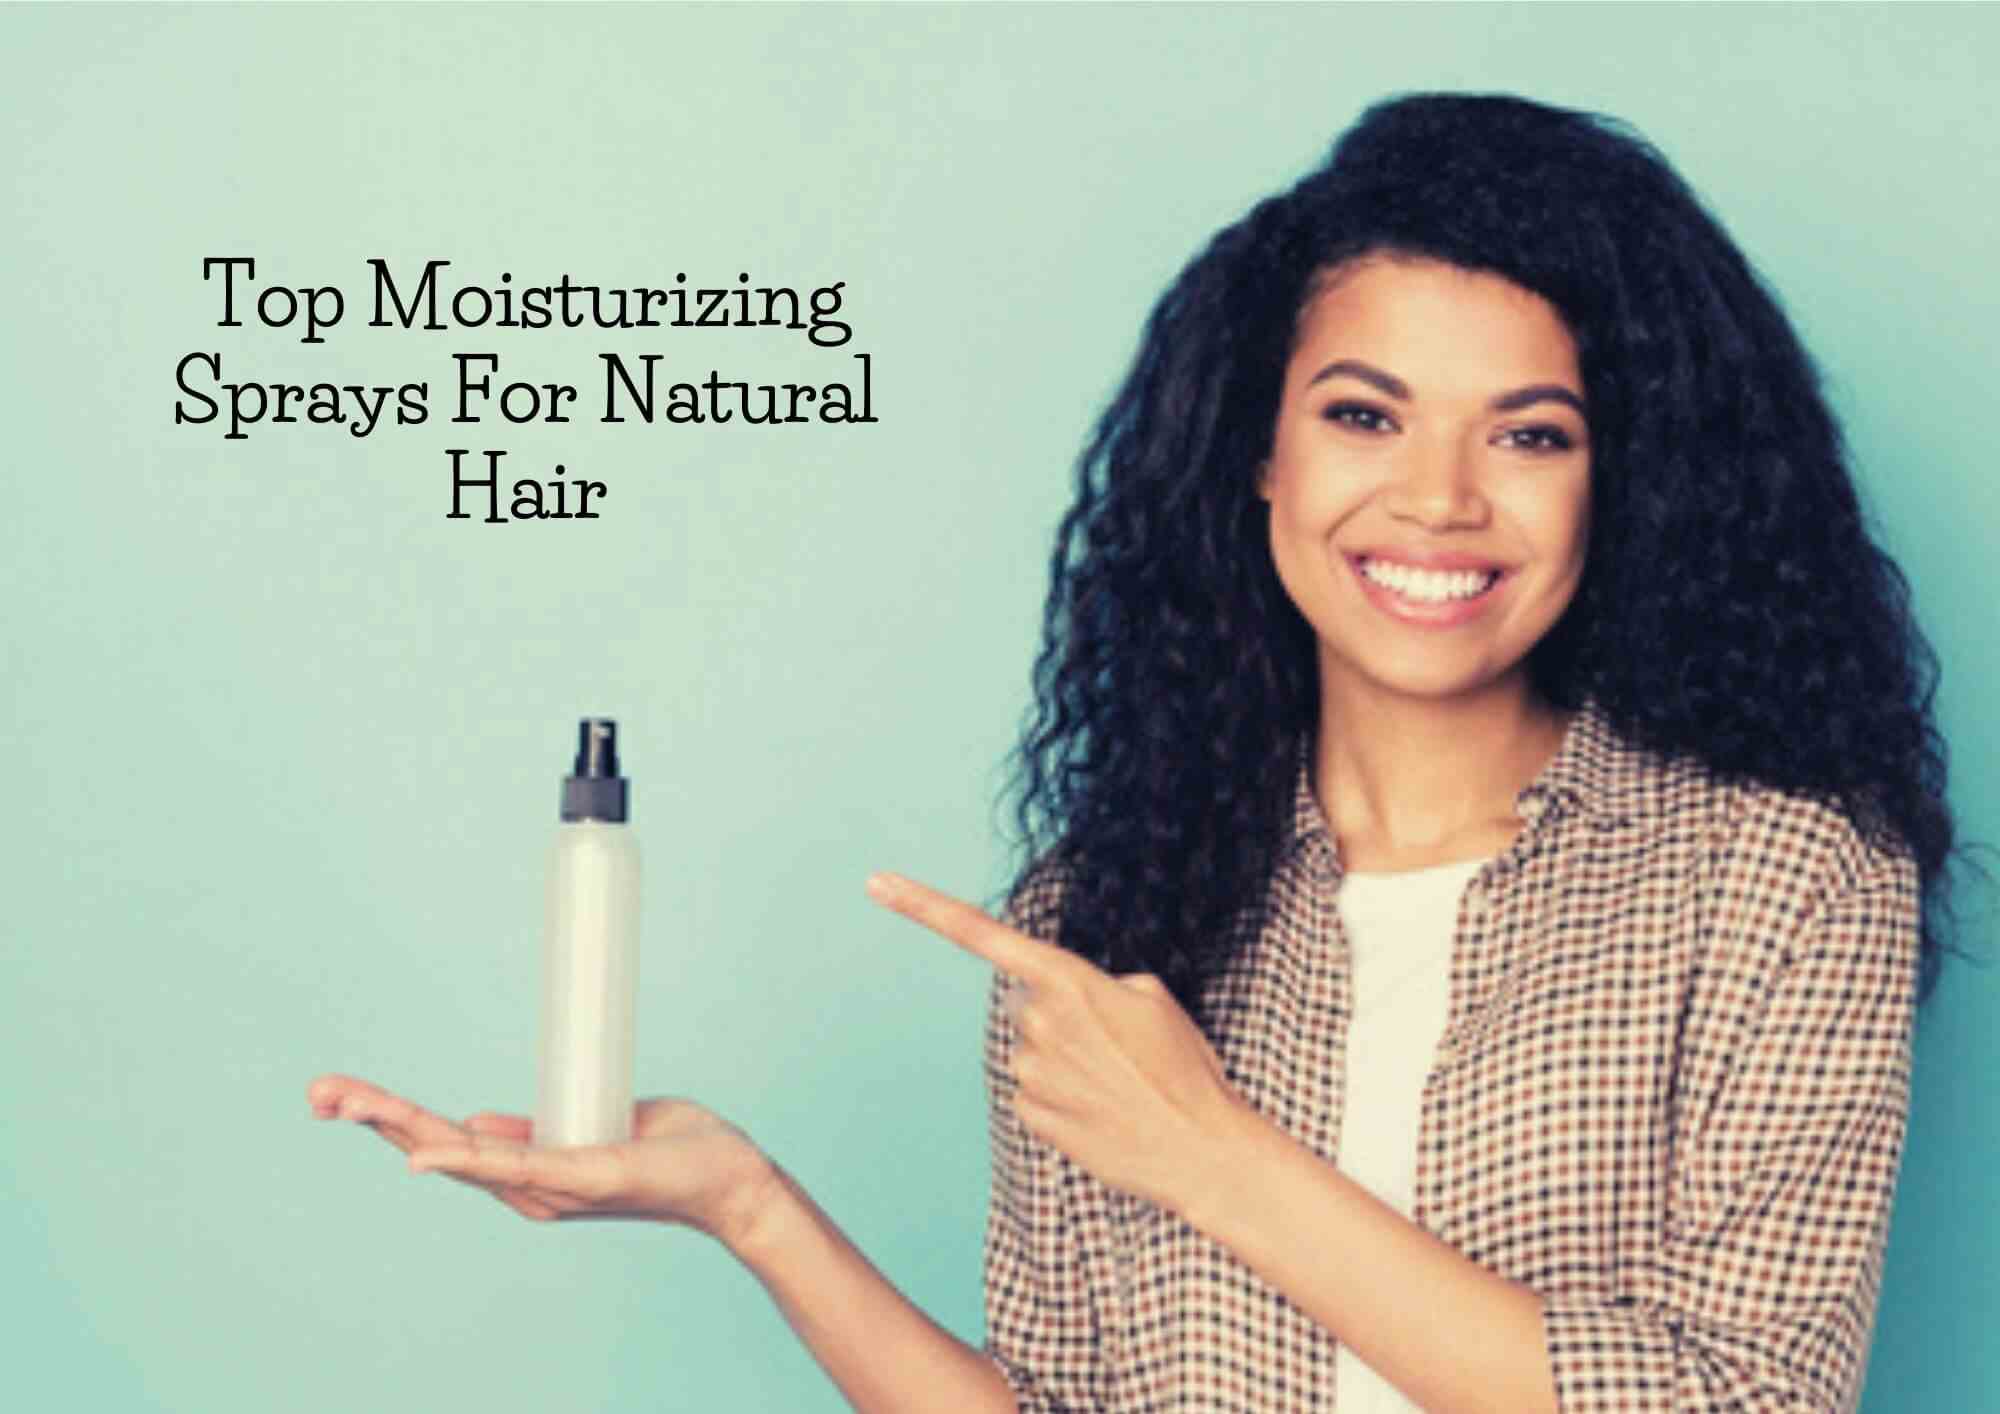 7 Best Spray Moisturizer For Natural Hair 2022 Refresh And Hydrate Your Curls Everyday Review